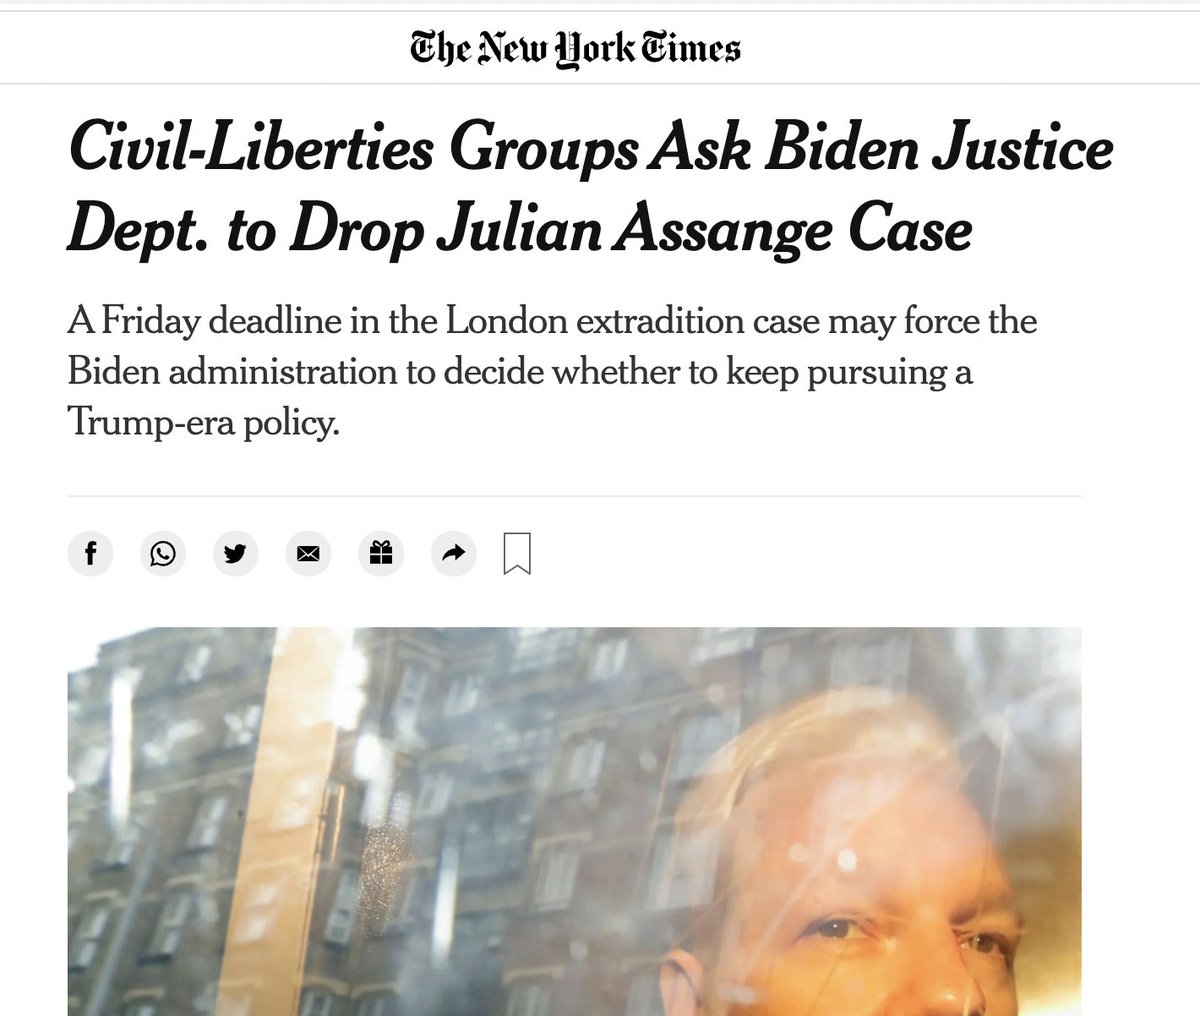 Press freedom and civil liberties groups throughout the West have repeatedly warned that Assange's prosecution is a grave threat to press freedom. The Biden DOJ ignored them, and today won a major victory toward permanently silencing the pioneering transparency activist.